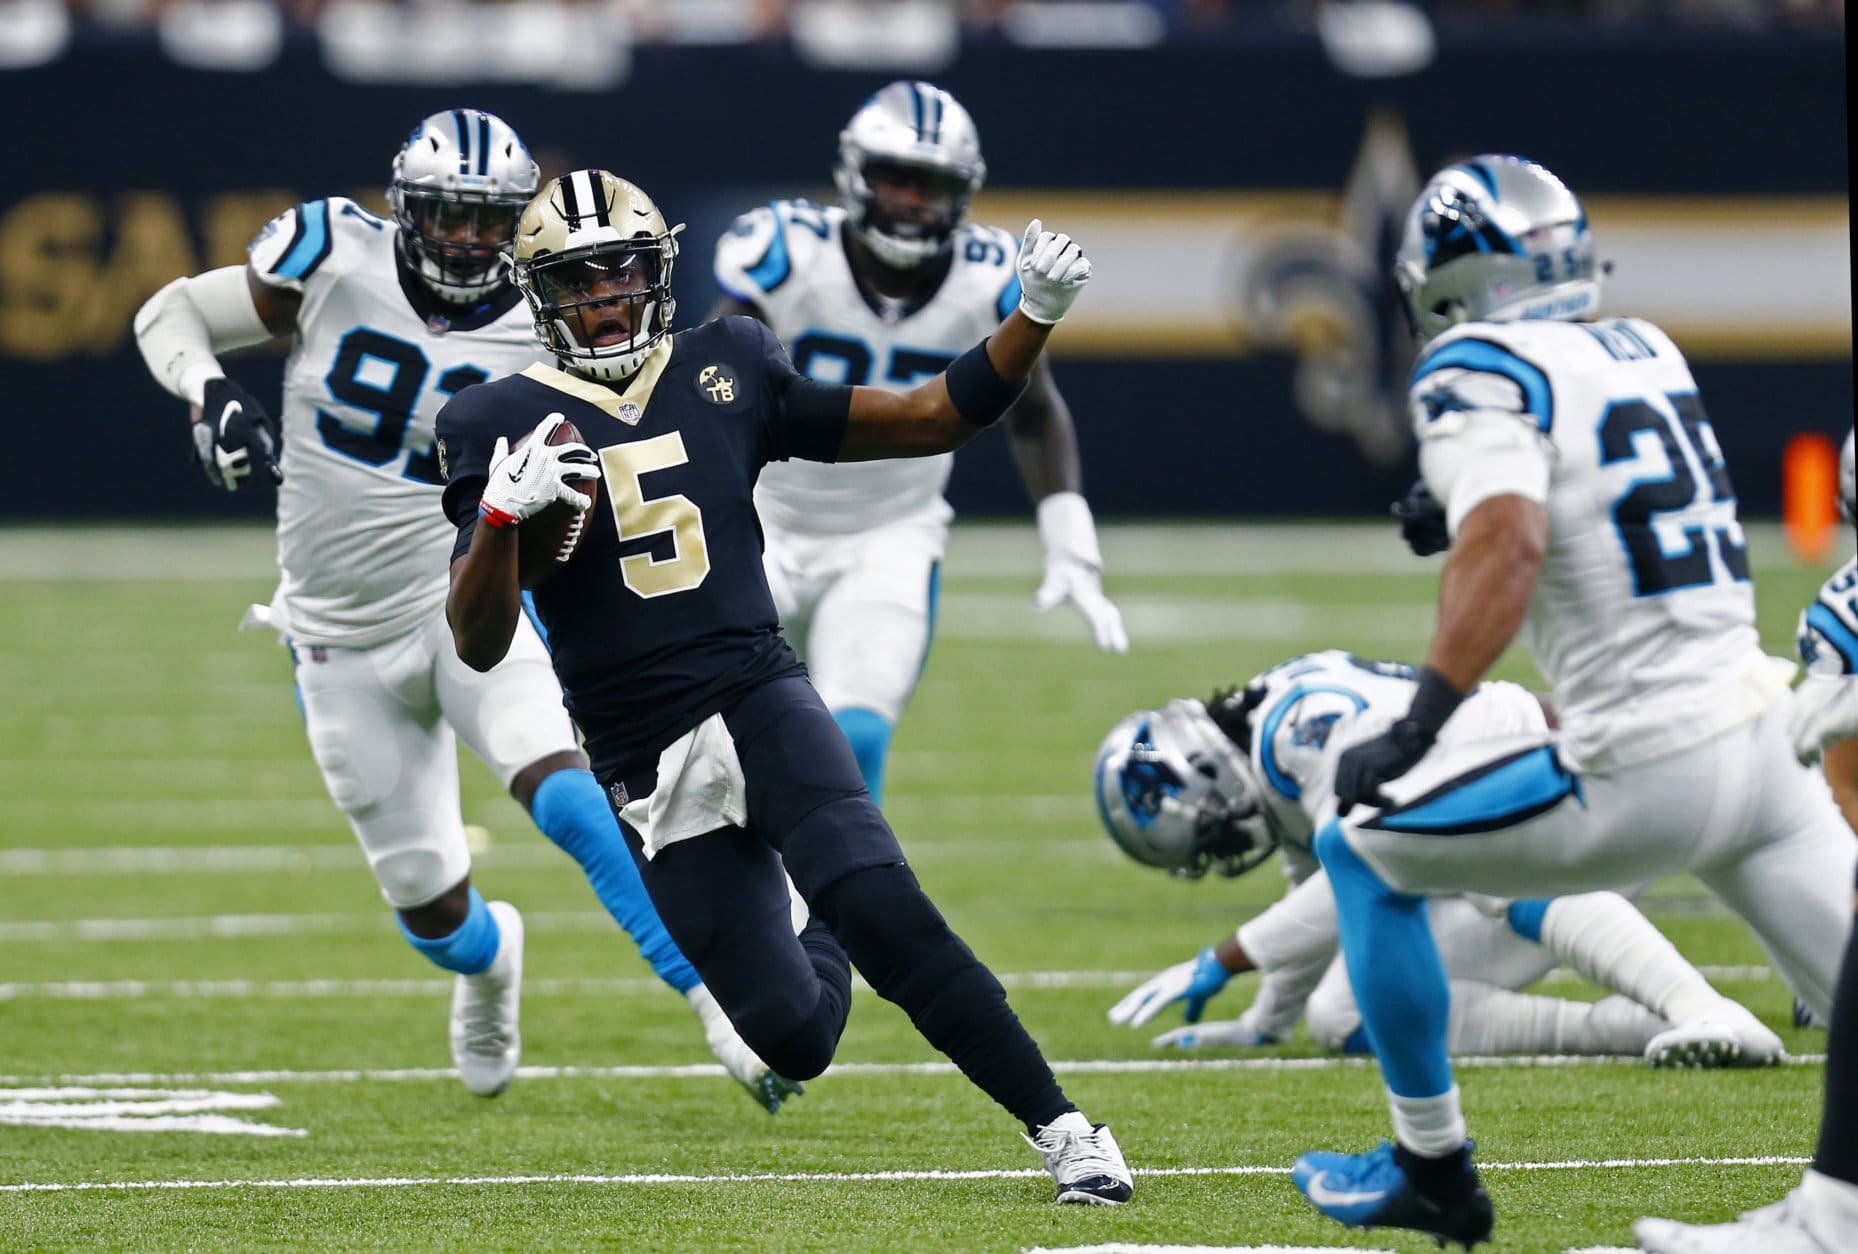 New Orleans Saints quarterback Teddy Bridgewater (5) goes to slide on a carry between Carolina Panthers strong safety Eric Reid (25) and defensive end Bryan Cox (91) in the first half of an NFL football game in New Orleans, Sunday, Dec. 30, 2018. (AP Photo/Butch Dill)